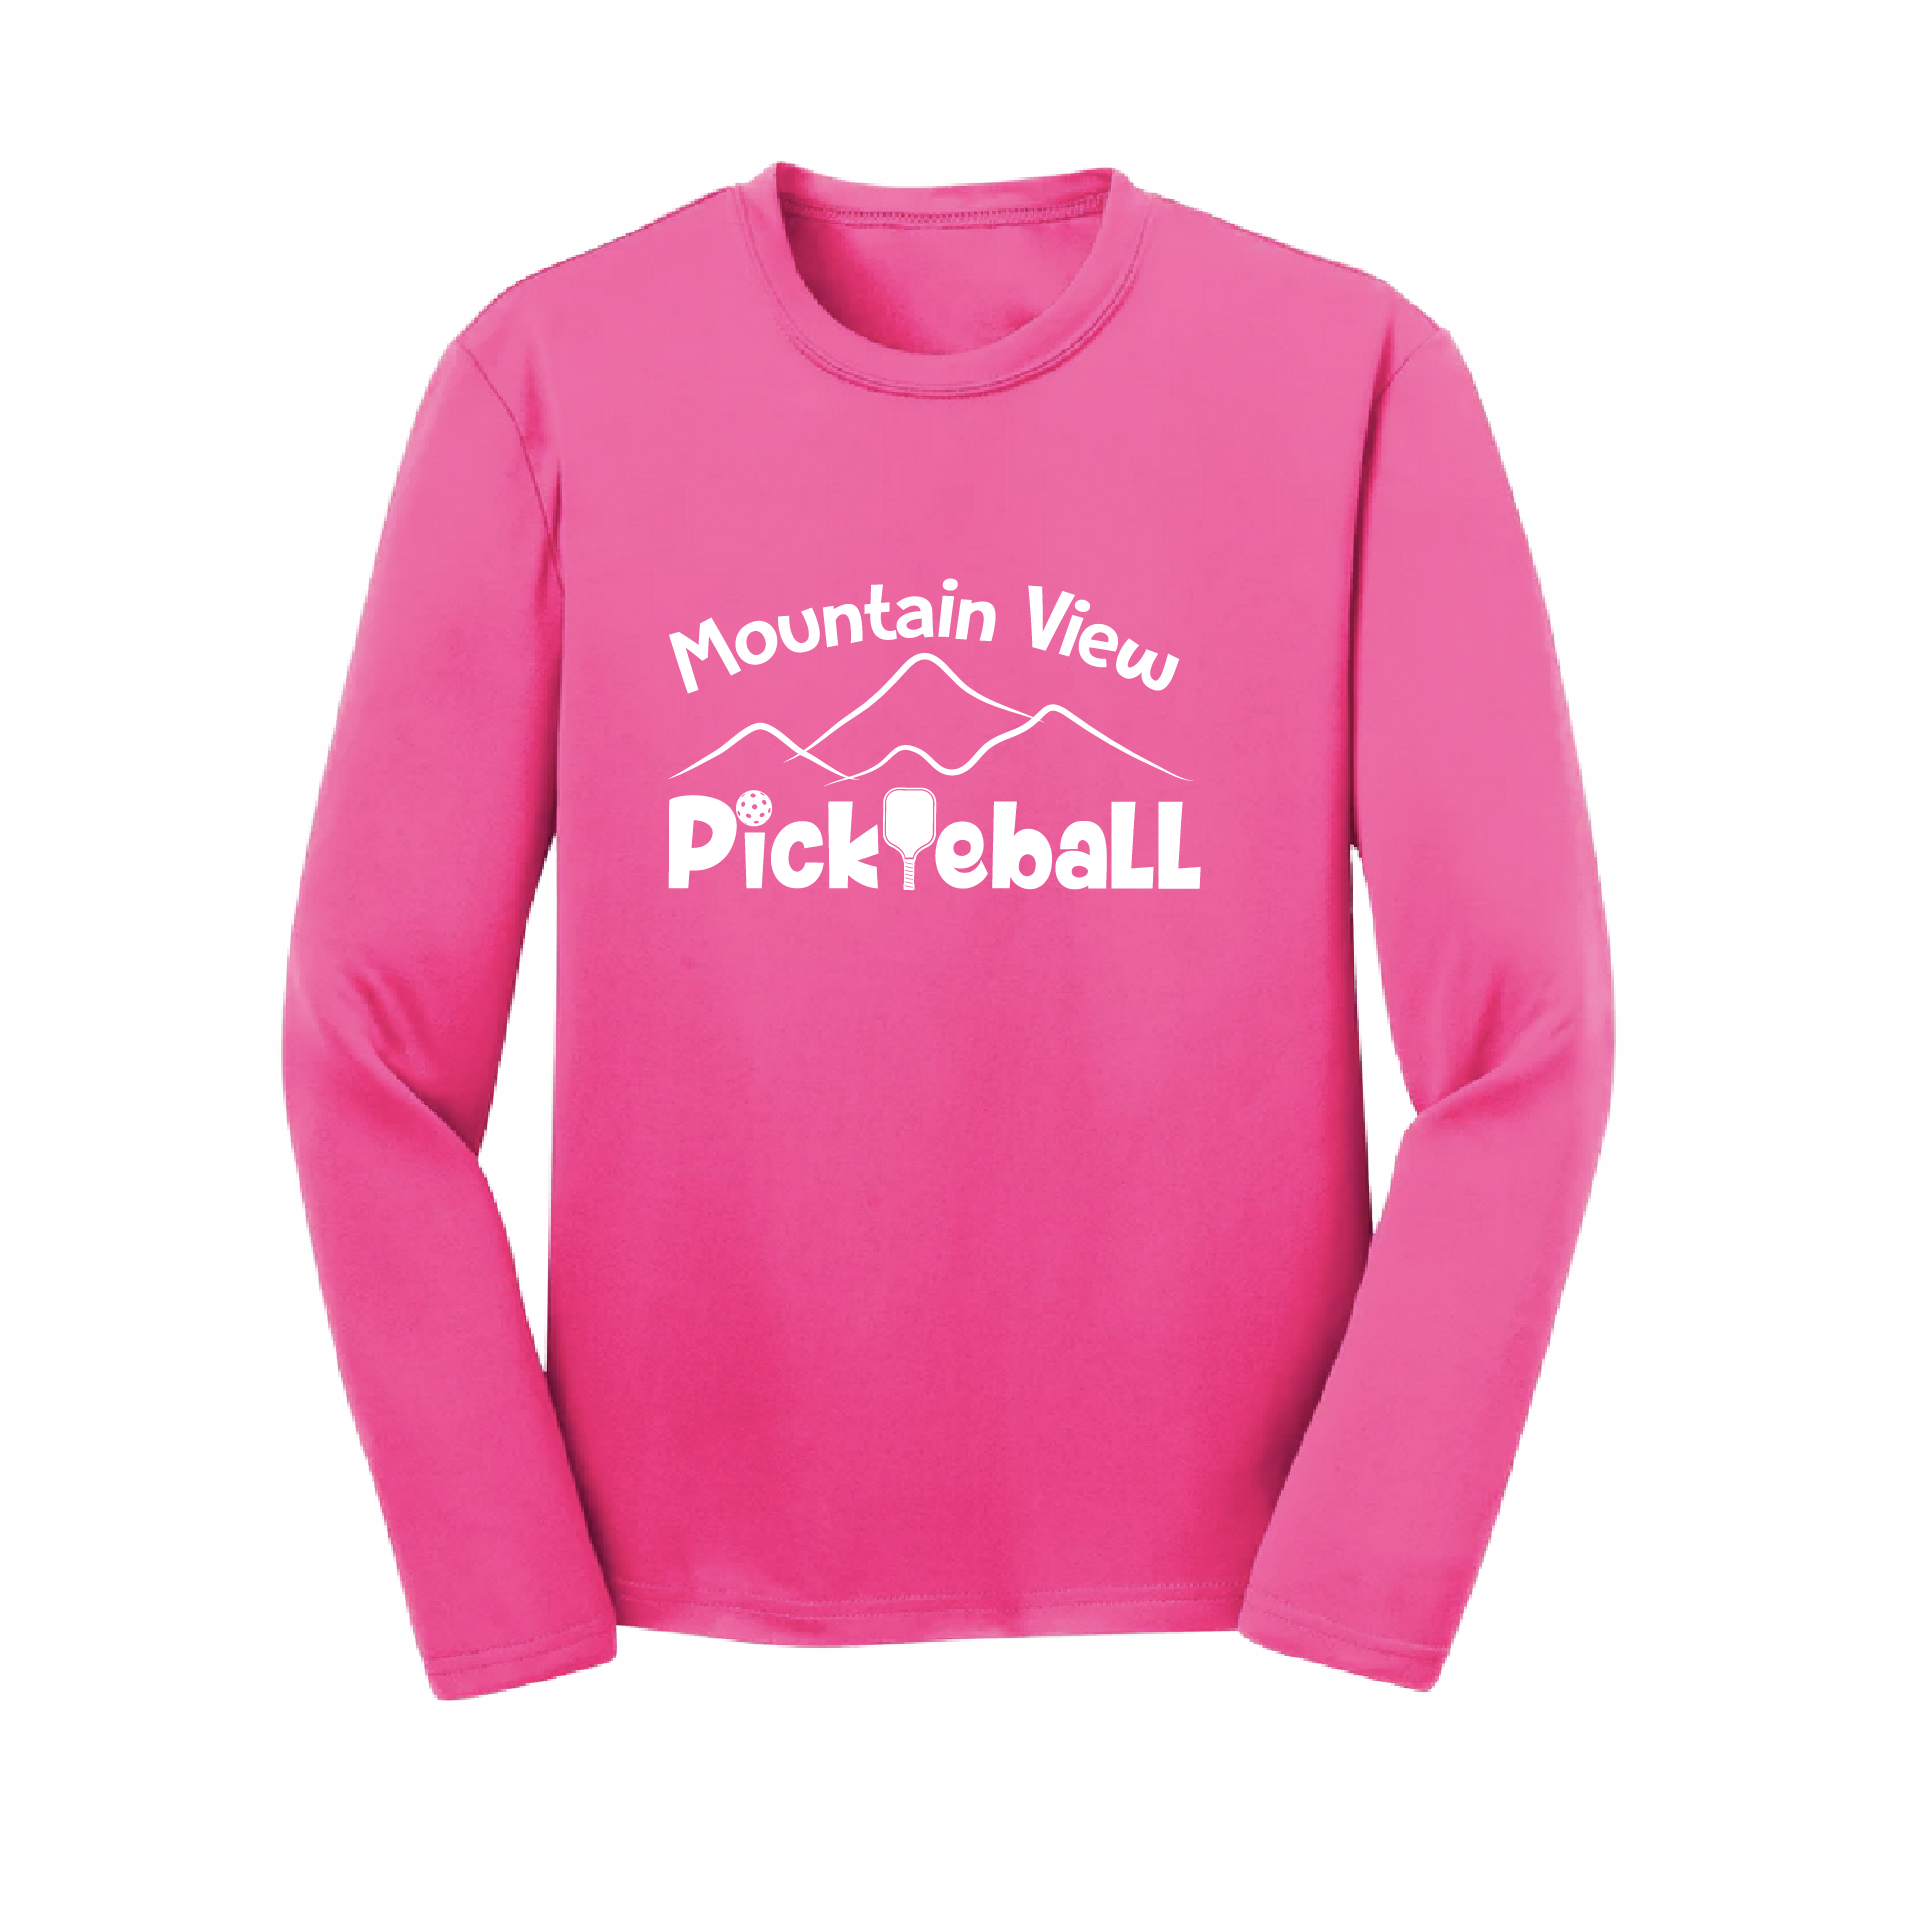 Pickleball Design: Mountain View Pickleball Club  Youth Styles: Long Sleeve  Shirts are lightweight, roomy and highly breathable. These moisture-wicking shirts are designed for athletic performance. They feature PosiCharge technology to lock in color and prevent logos from fading. Removable tag and set-in sleeves for comfort.